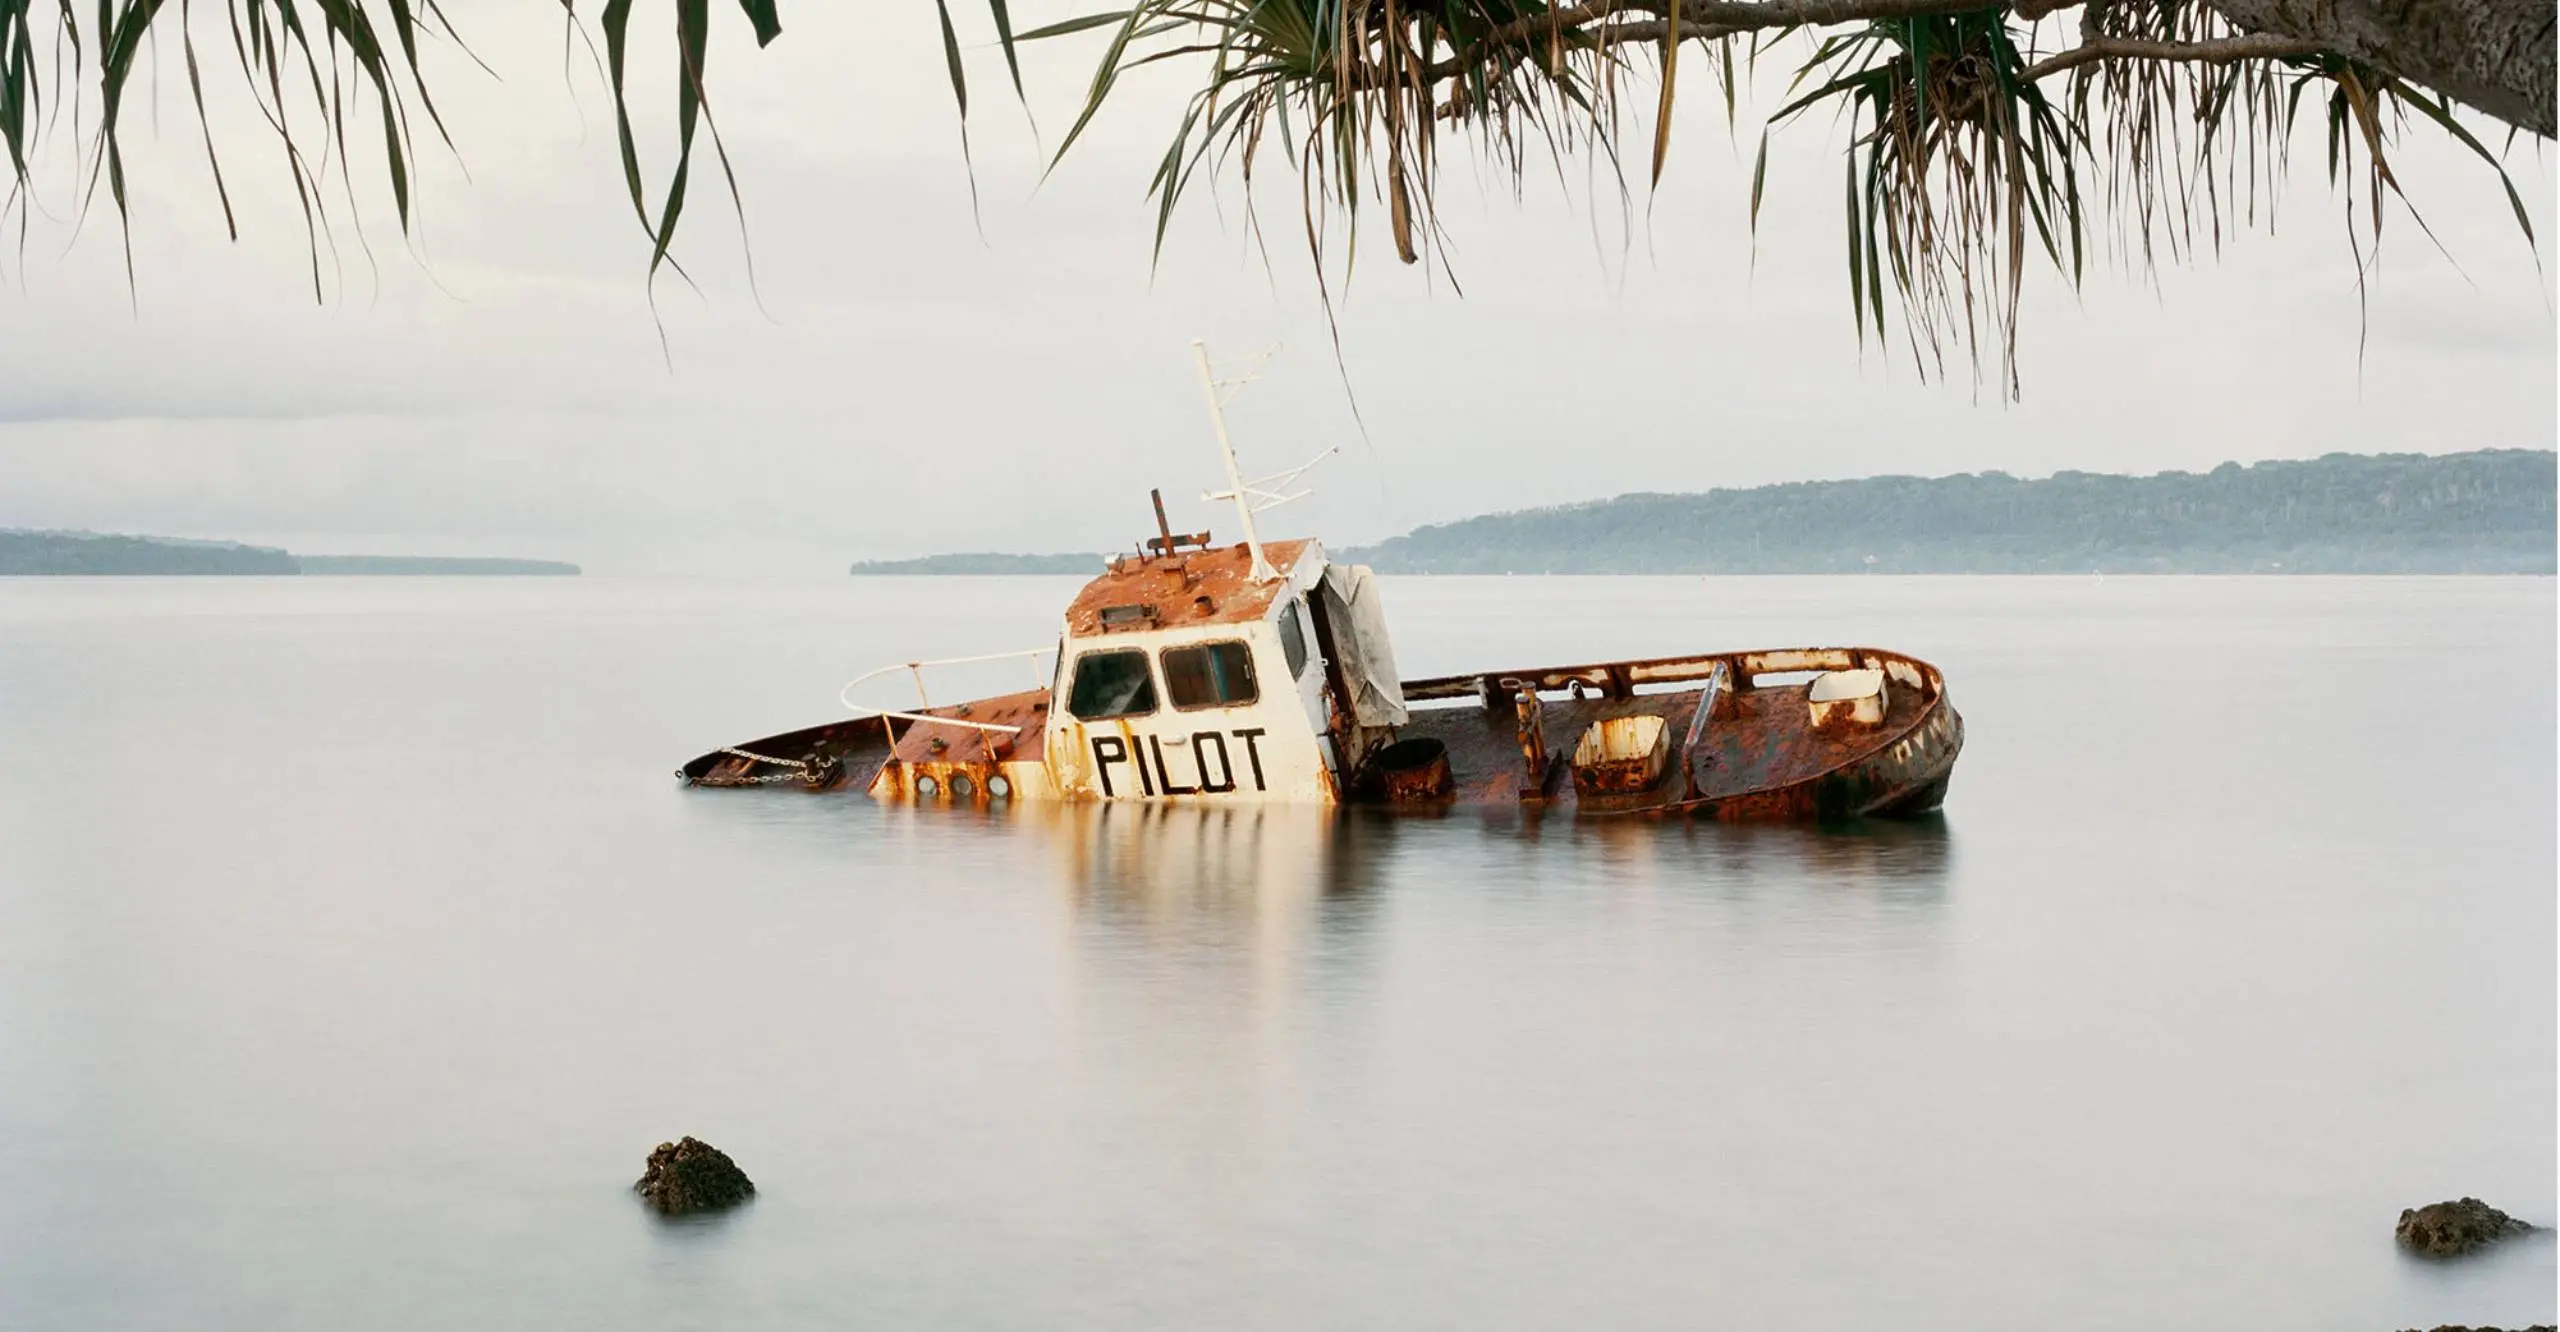 Colour image of partially submerged rusty boat in the water